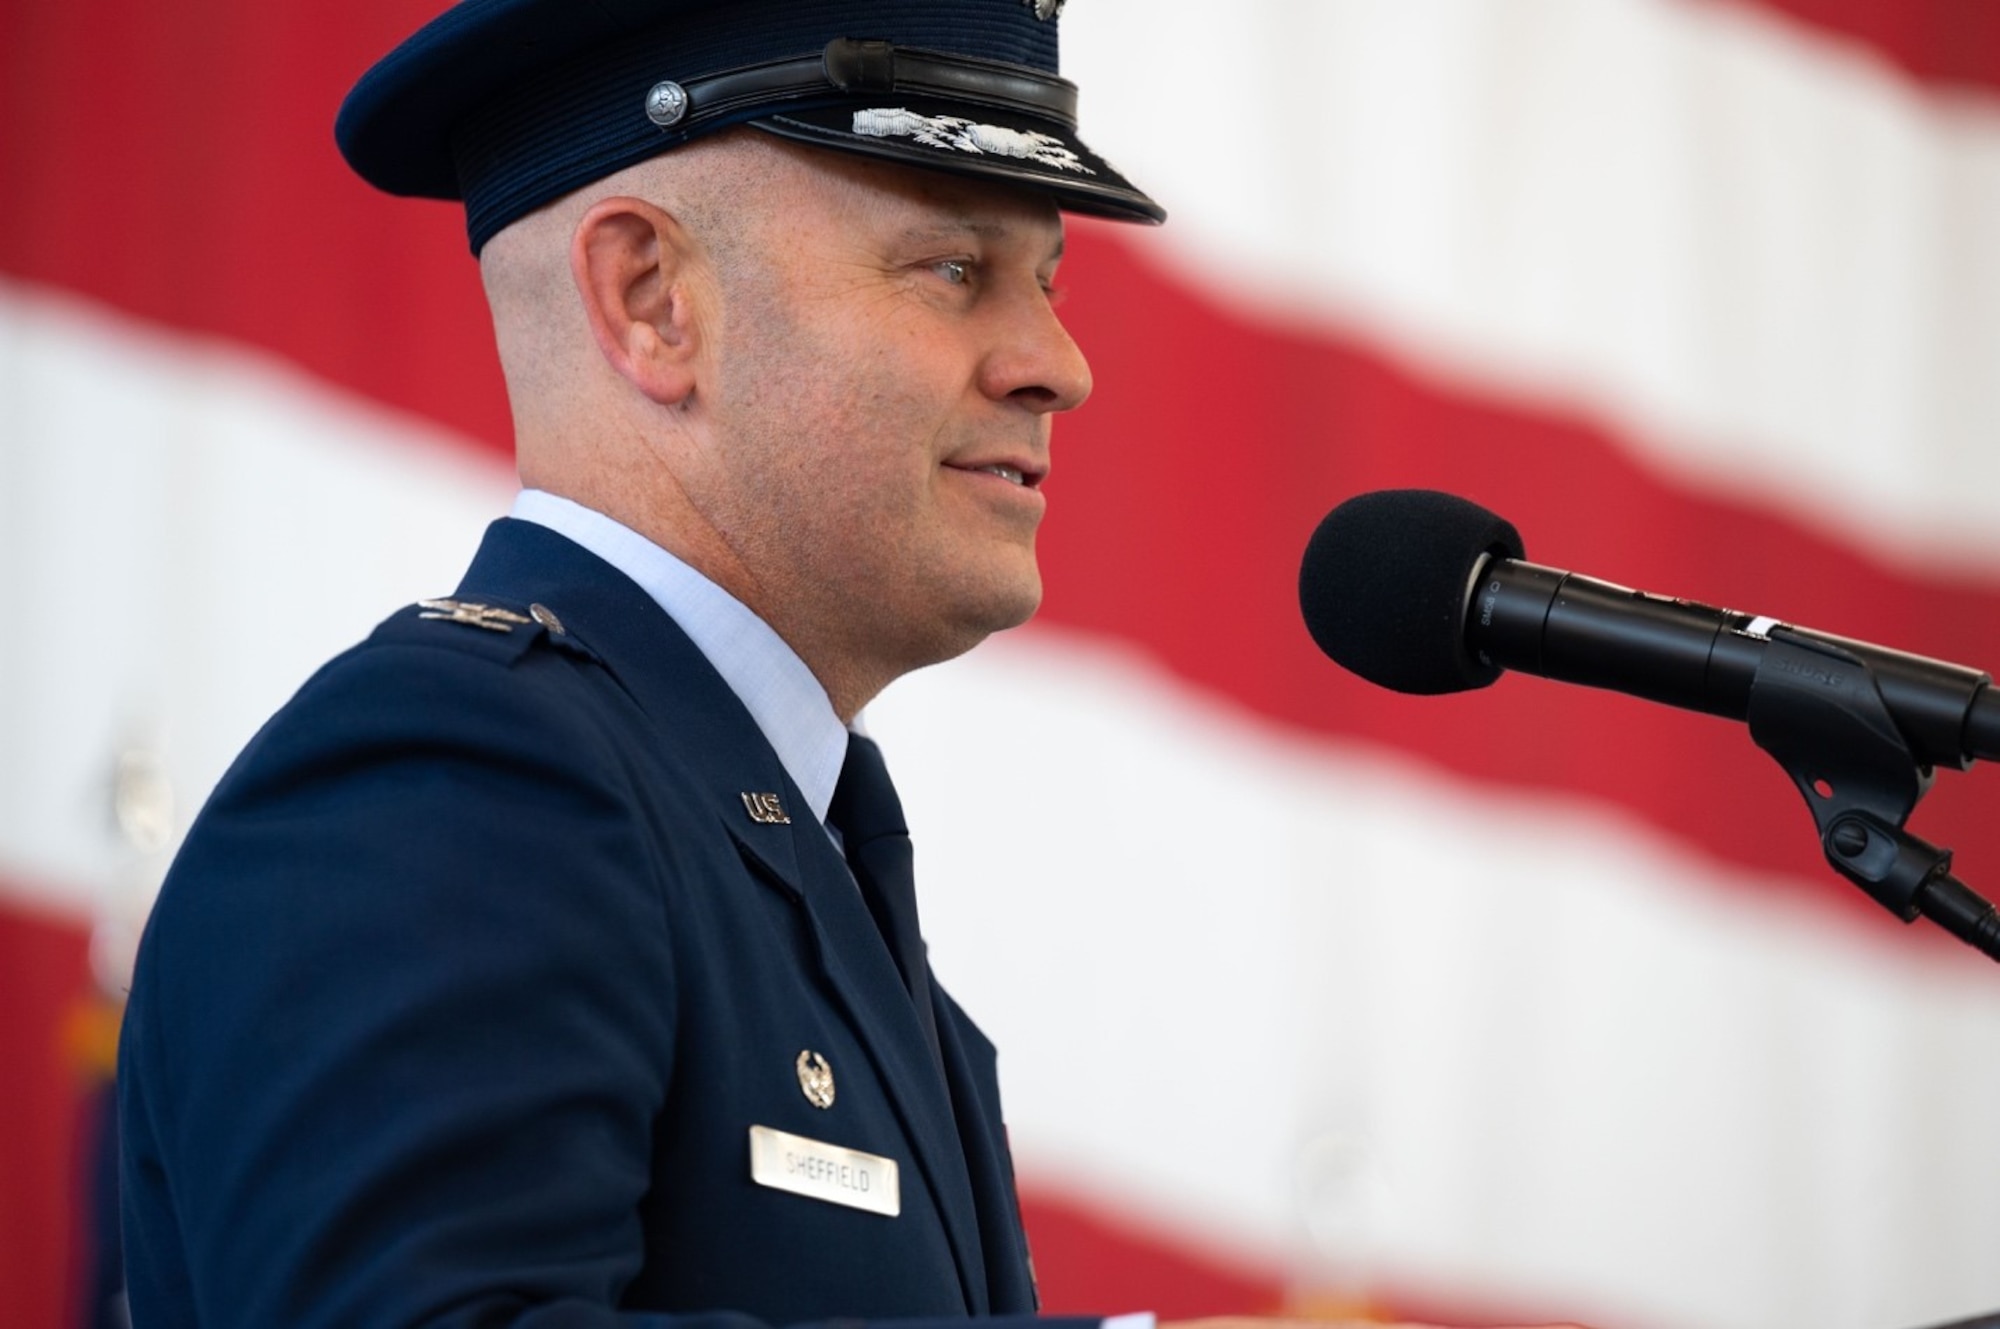 Col. Joseph L. Sheffield, the new commander of the 28th Bomb Wing, addresses the audience during the change of command ceremony at Ellsworth Air Force Base, S.D., June 18, 2021.